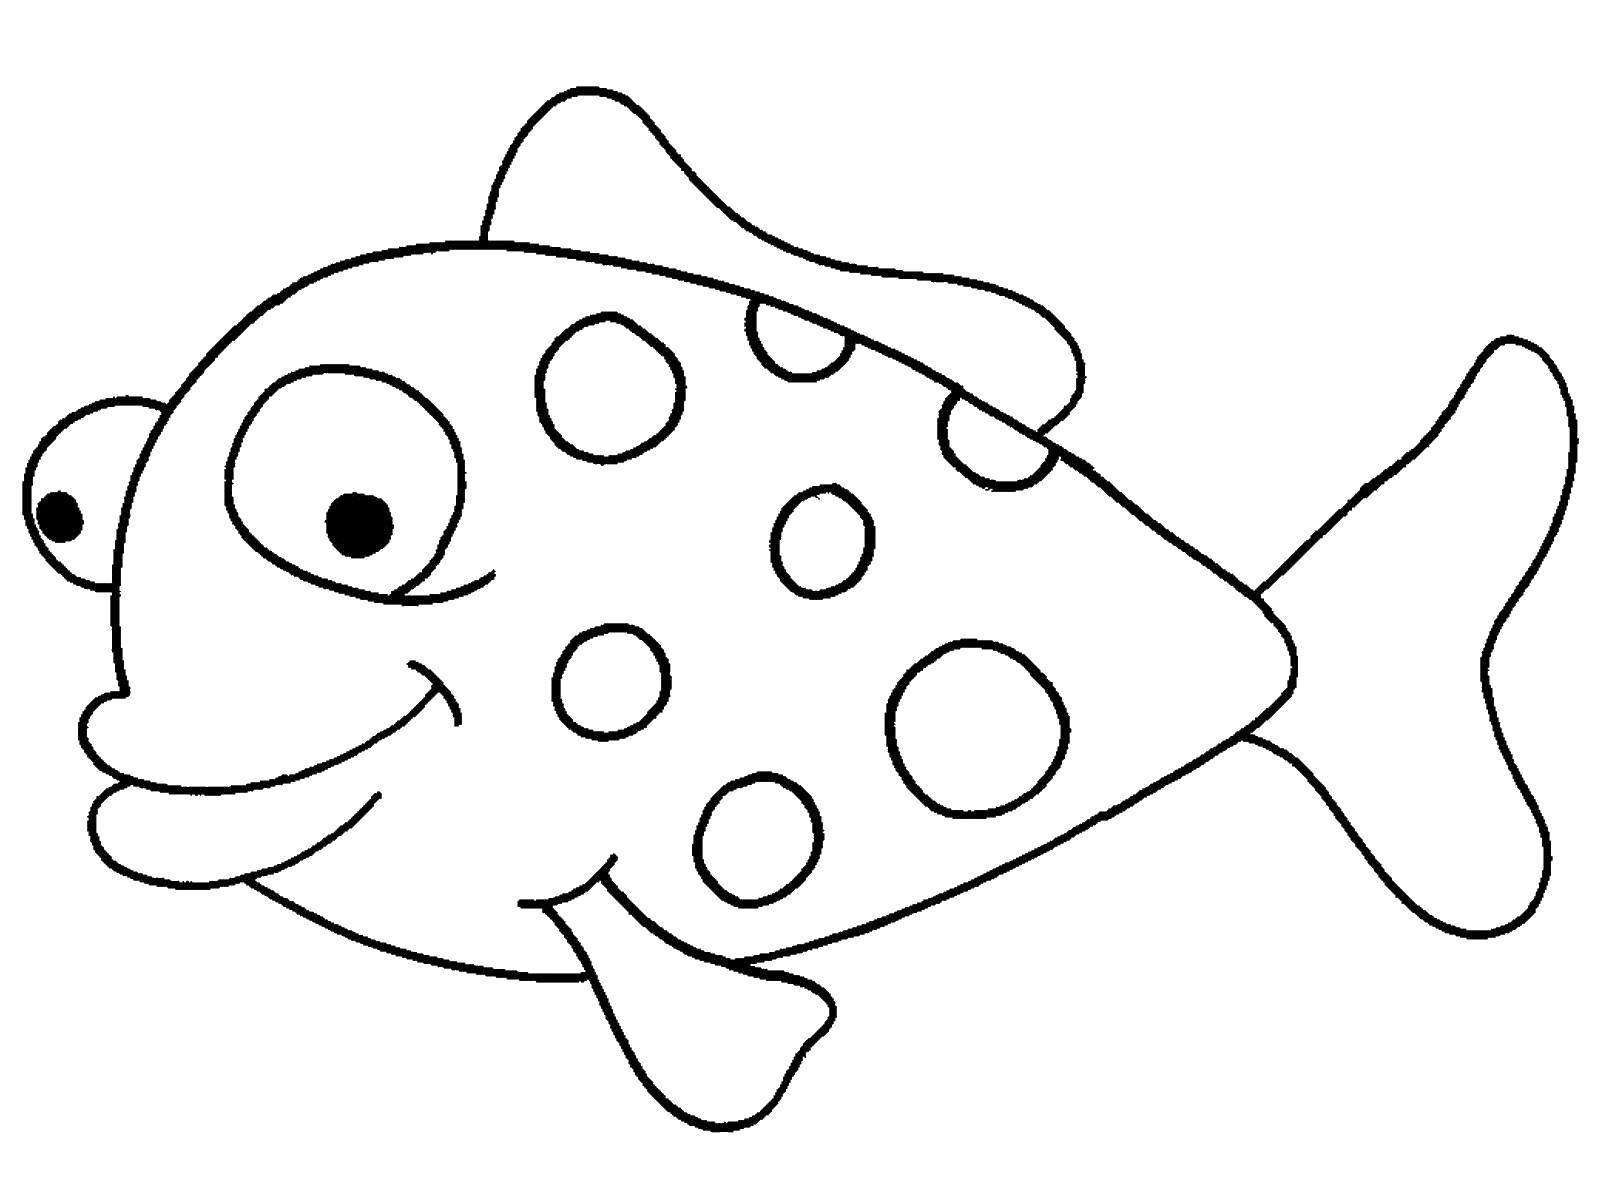 Coloring Smiling fish. Category fish. Tags:  marine inhabitants, the sea, fish, water.